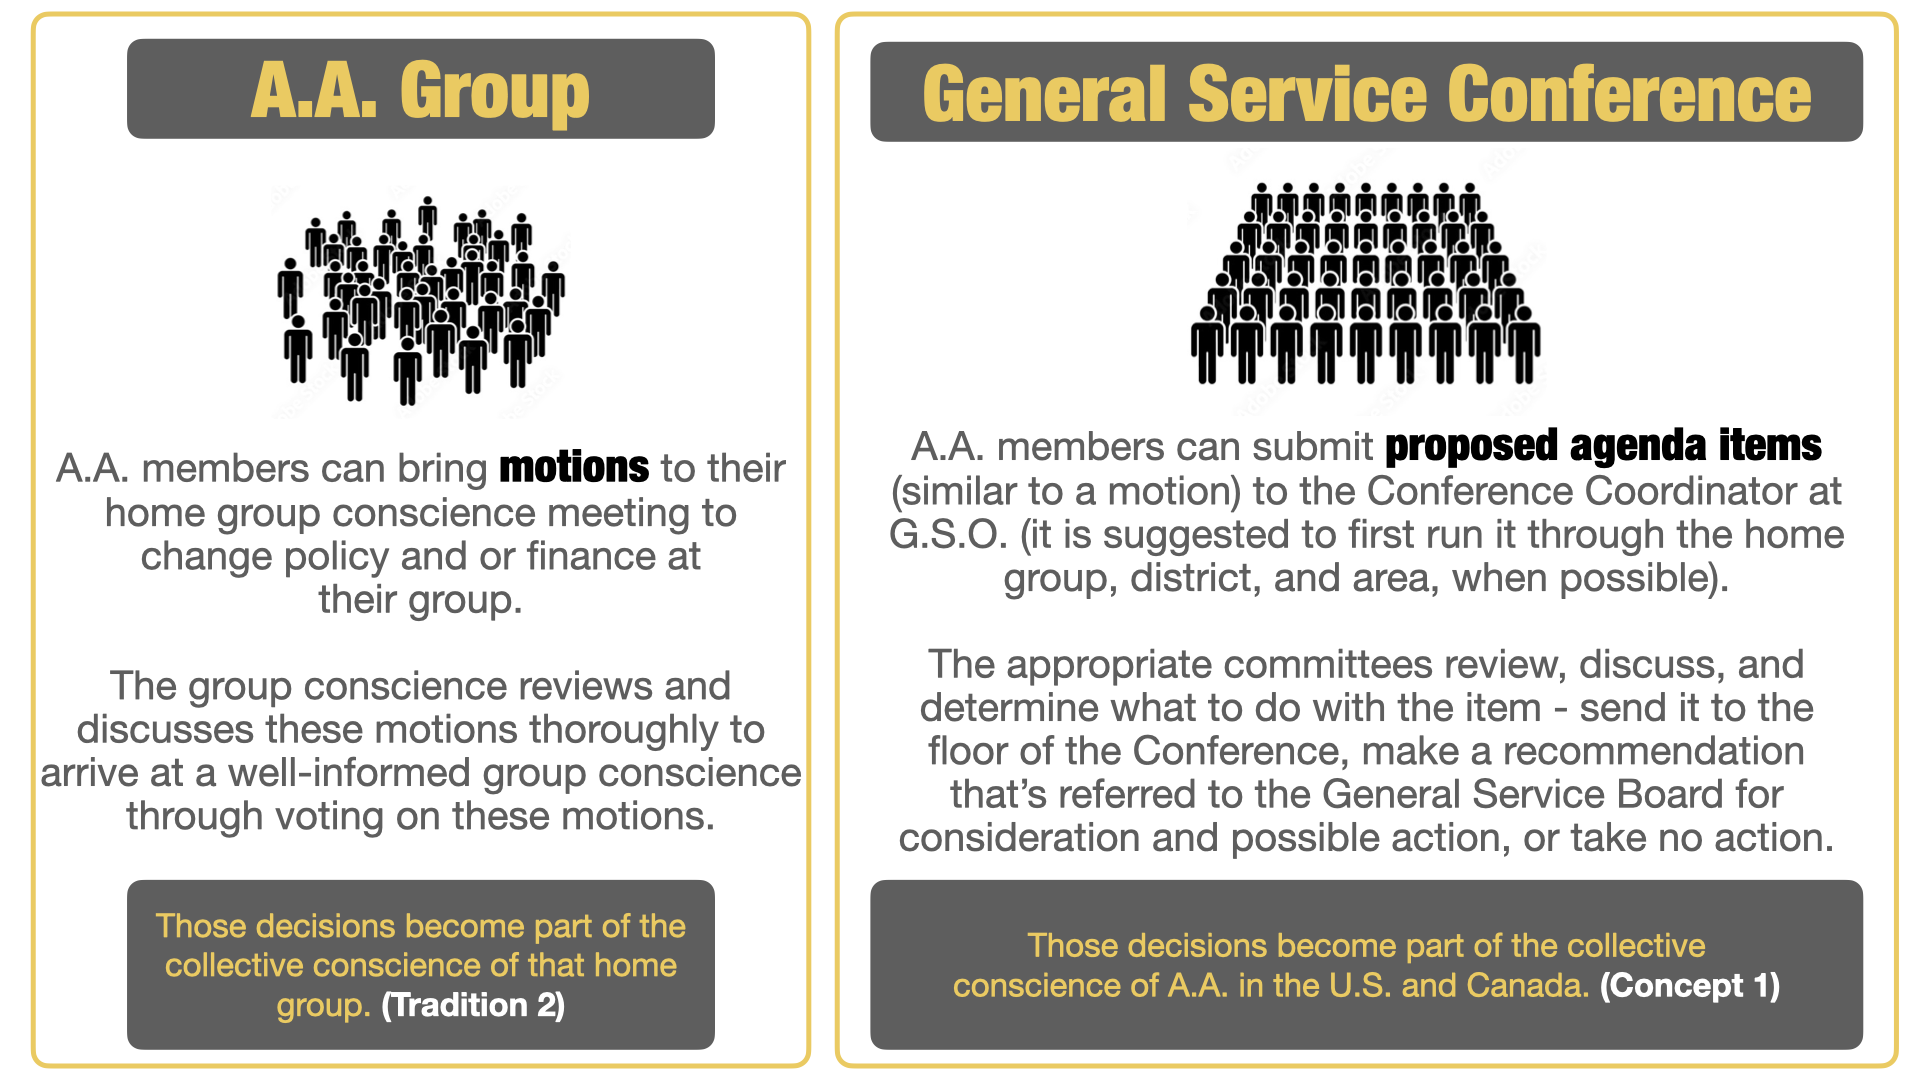 What Is The General Service Conference?